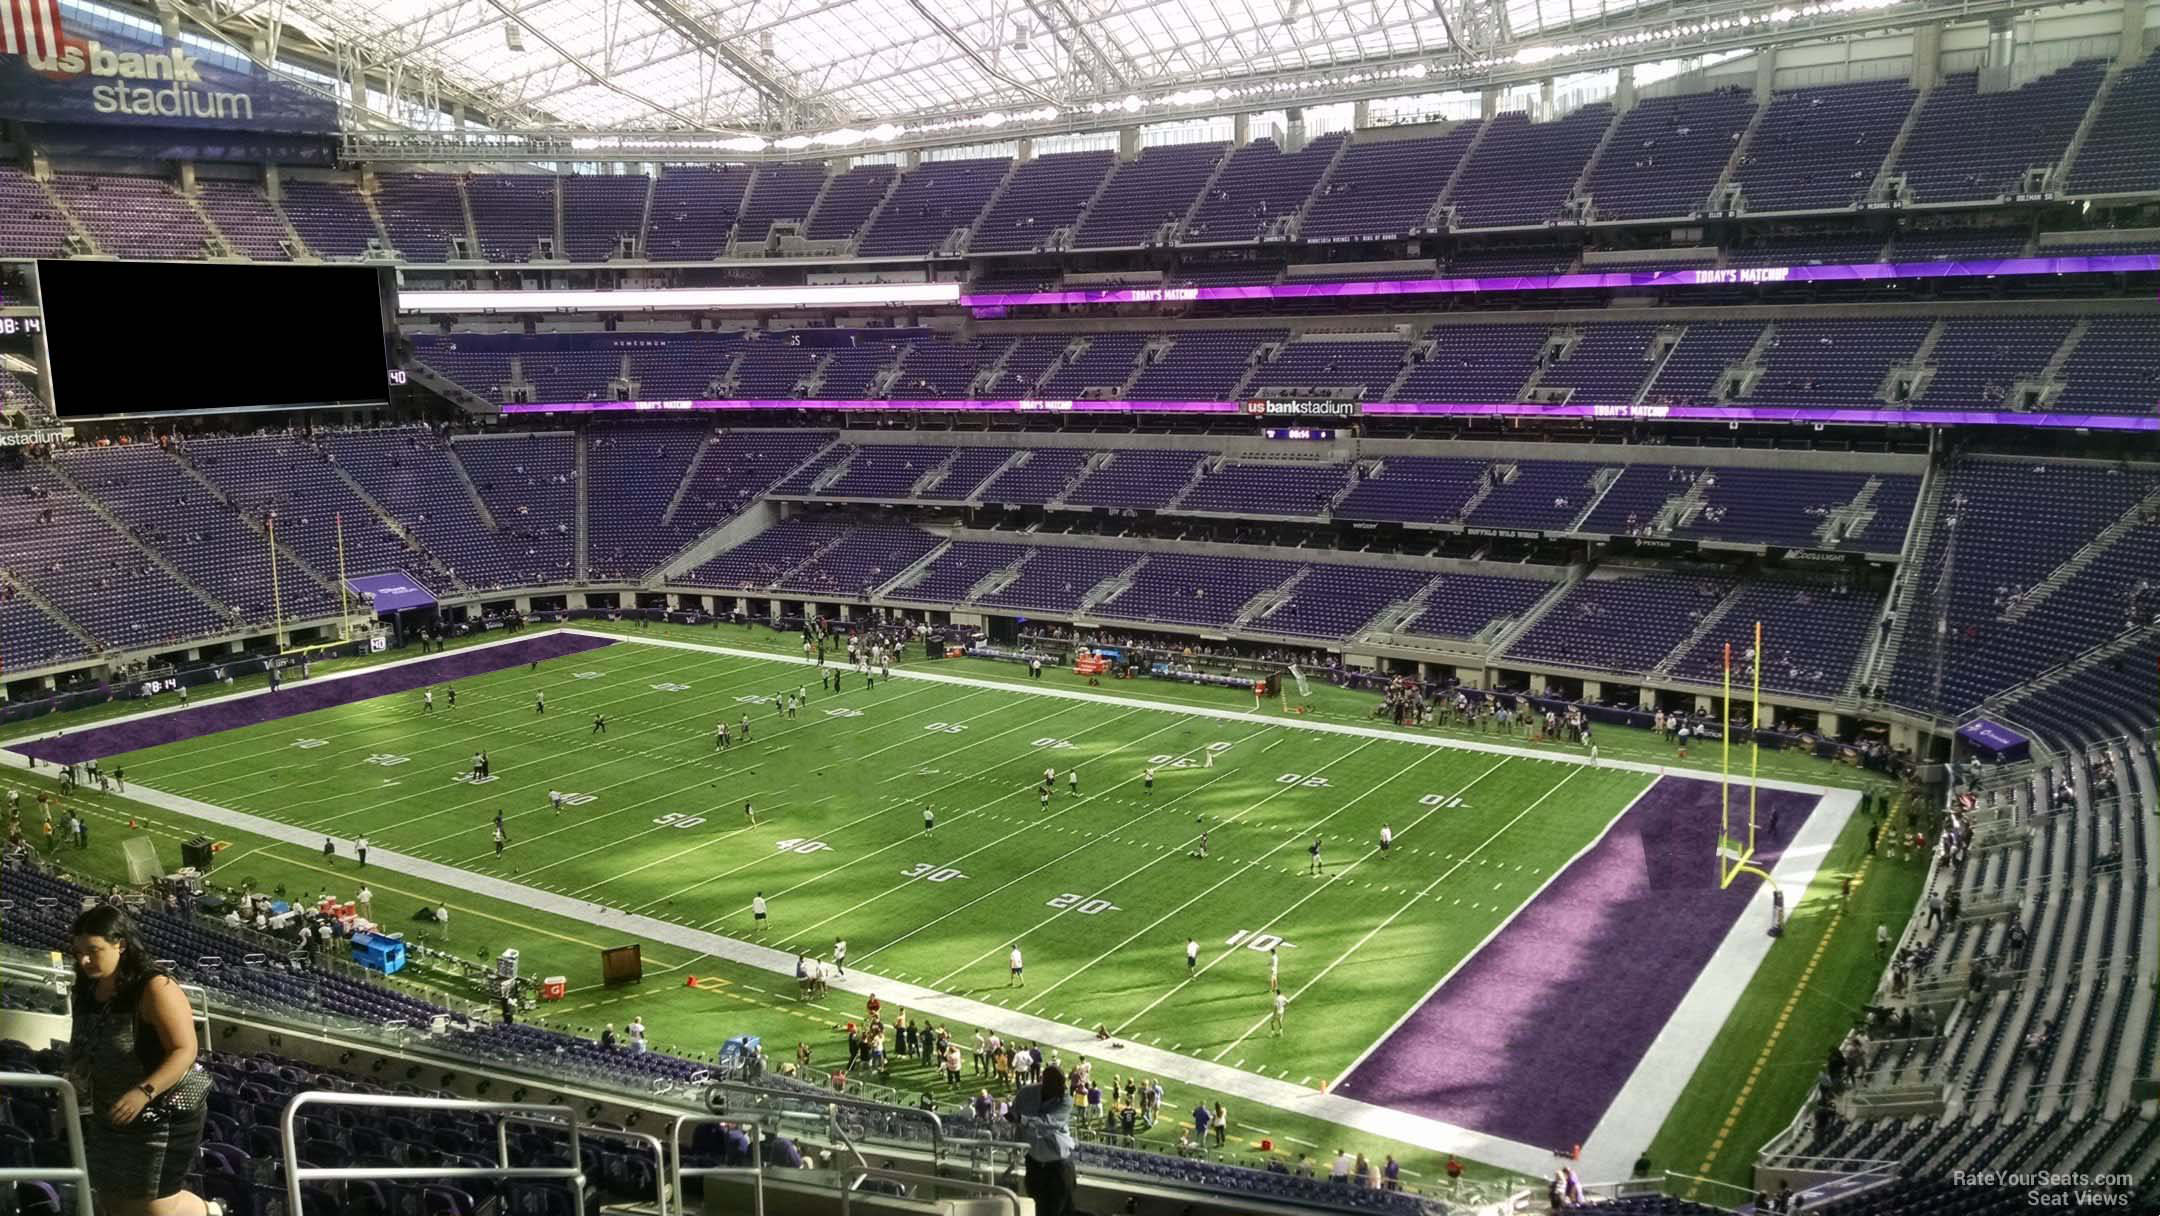 section 205, row 15 seat view  for football - u.s. bank stadium